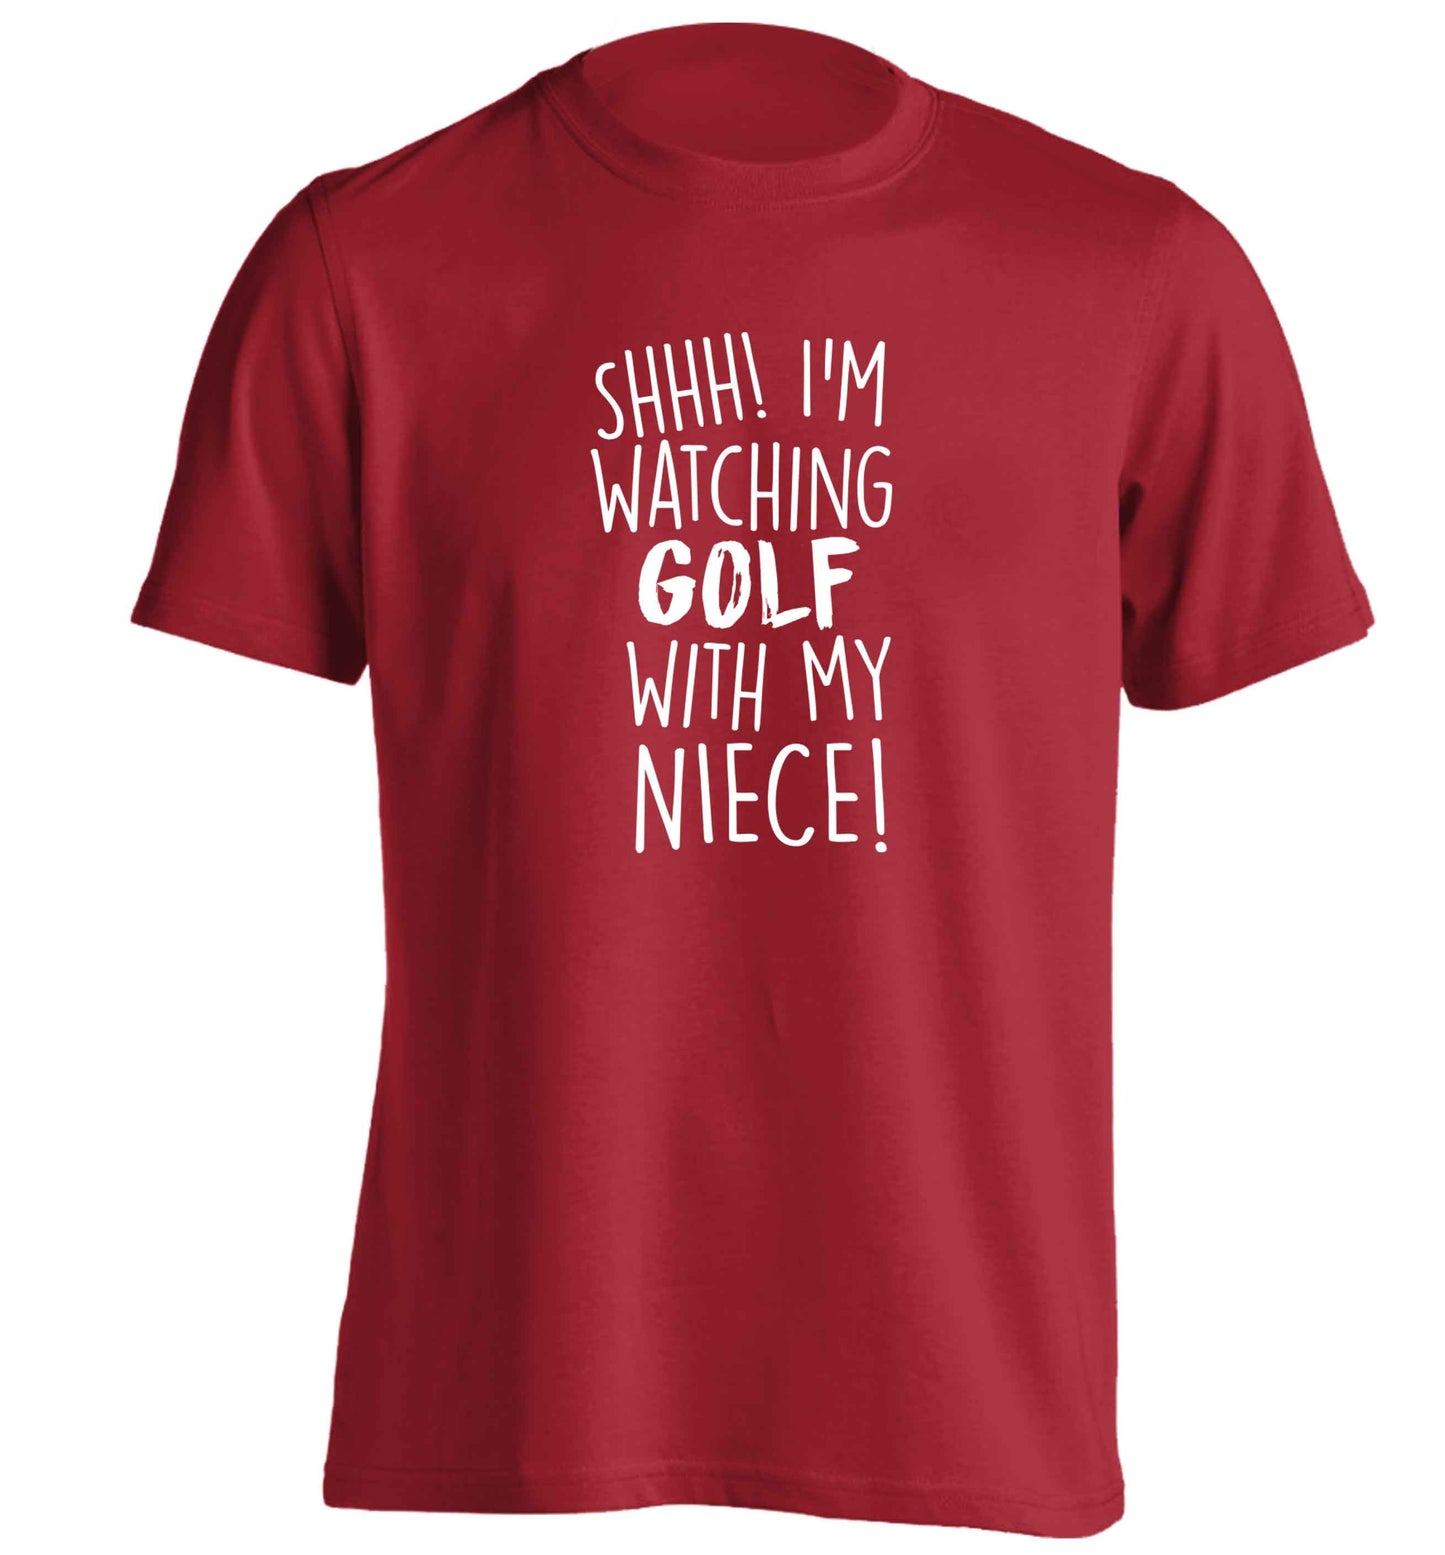 Shh I'm watching golf with my niece adults unisex red Tshirt 2XL